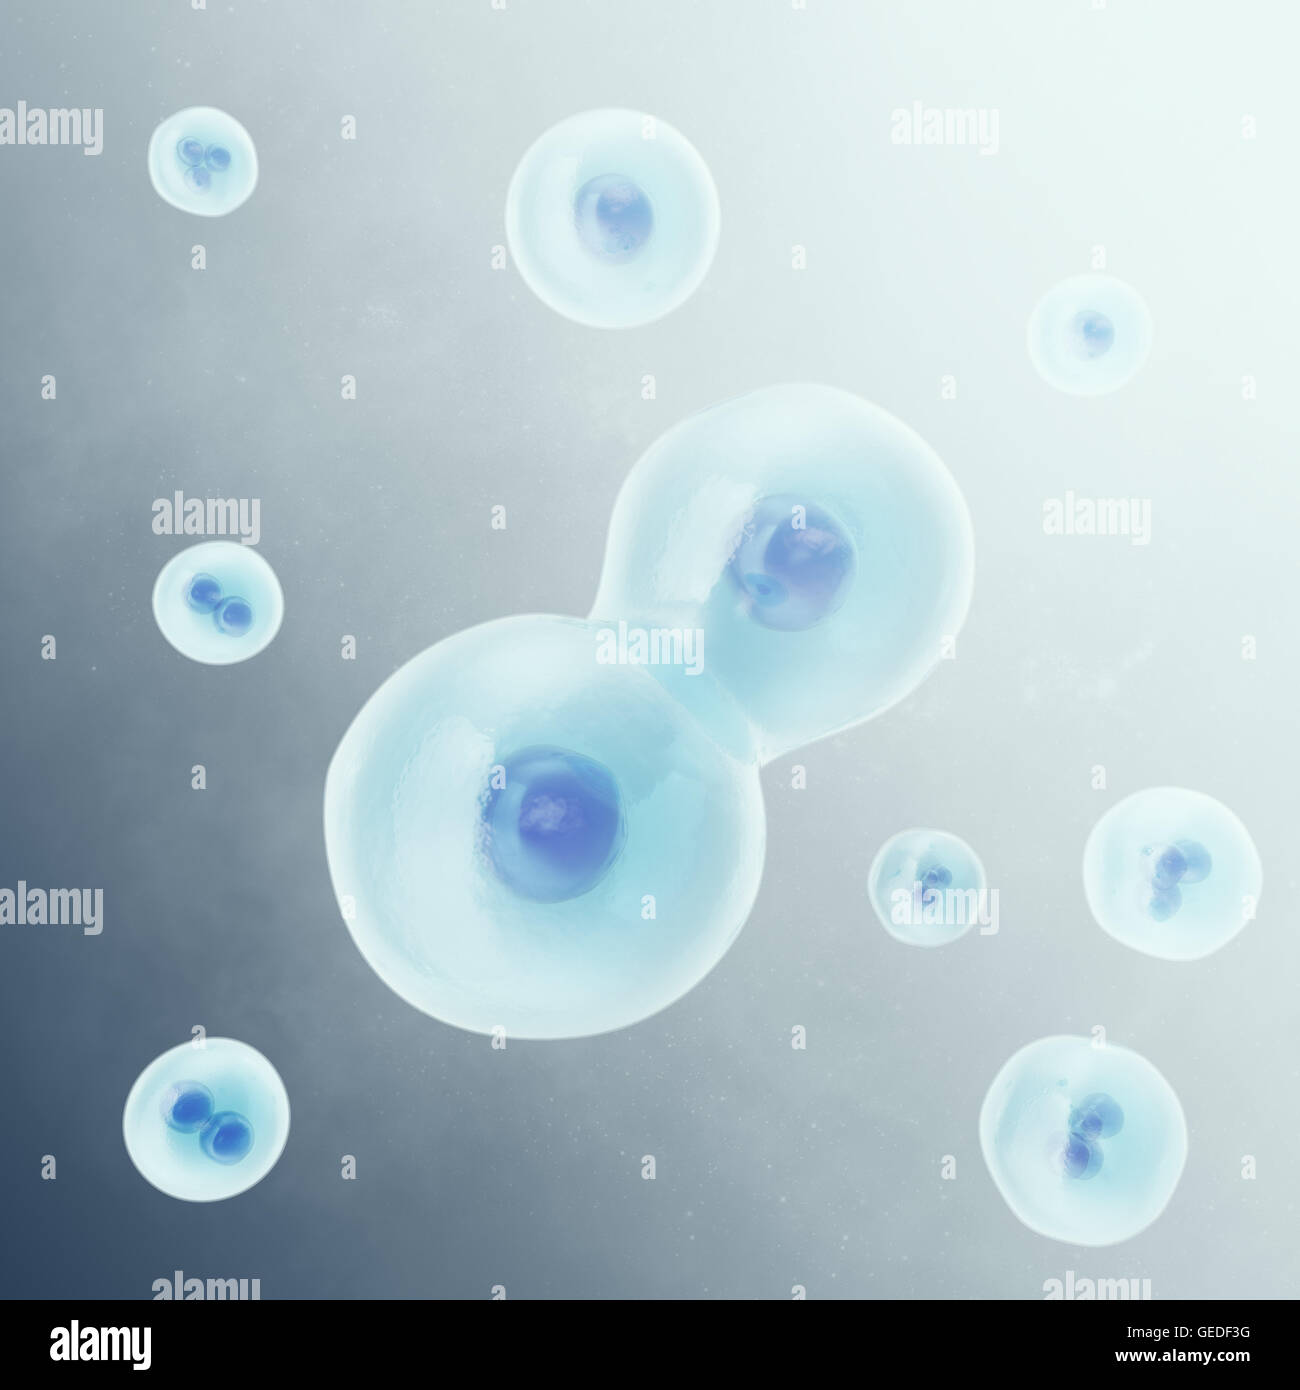 Human cell, animal  divides into two cells. Medicine scientific, life and biology, molecular research dna. 3d illustration Stock Photo